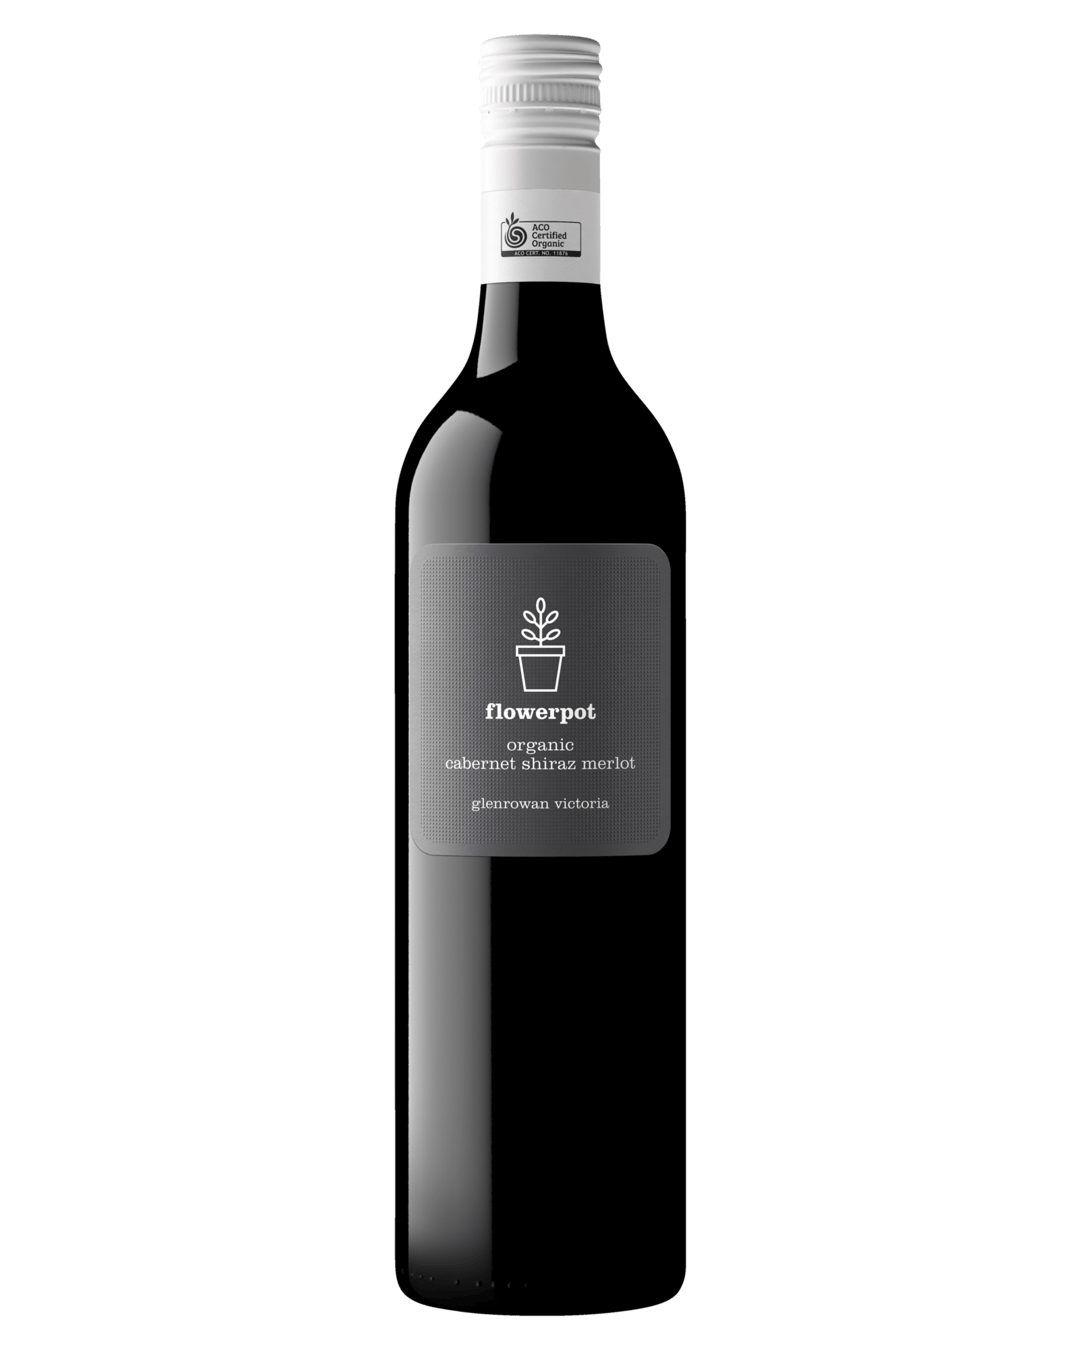 Buy Stanley Shiraz Cabernet Cask 4l online with (same-day FREE delivery*)  in Australia at Everyday Low Prices: BWS